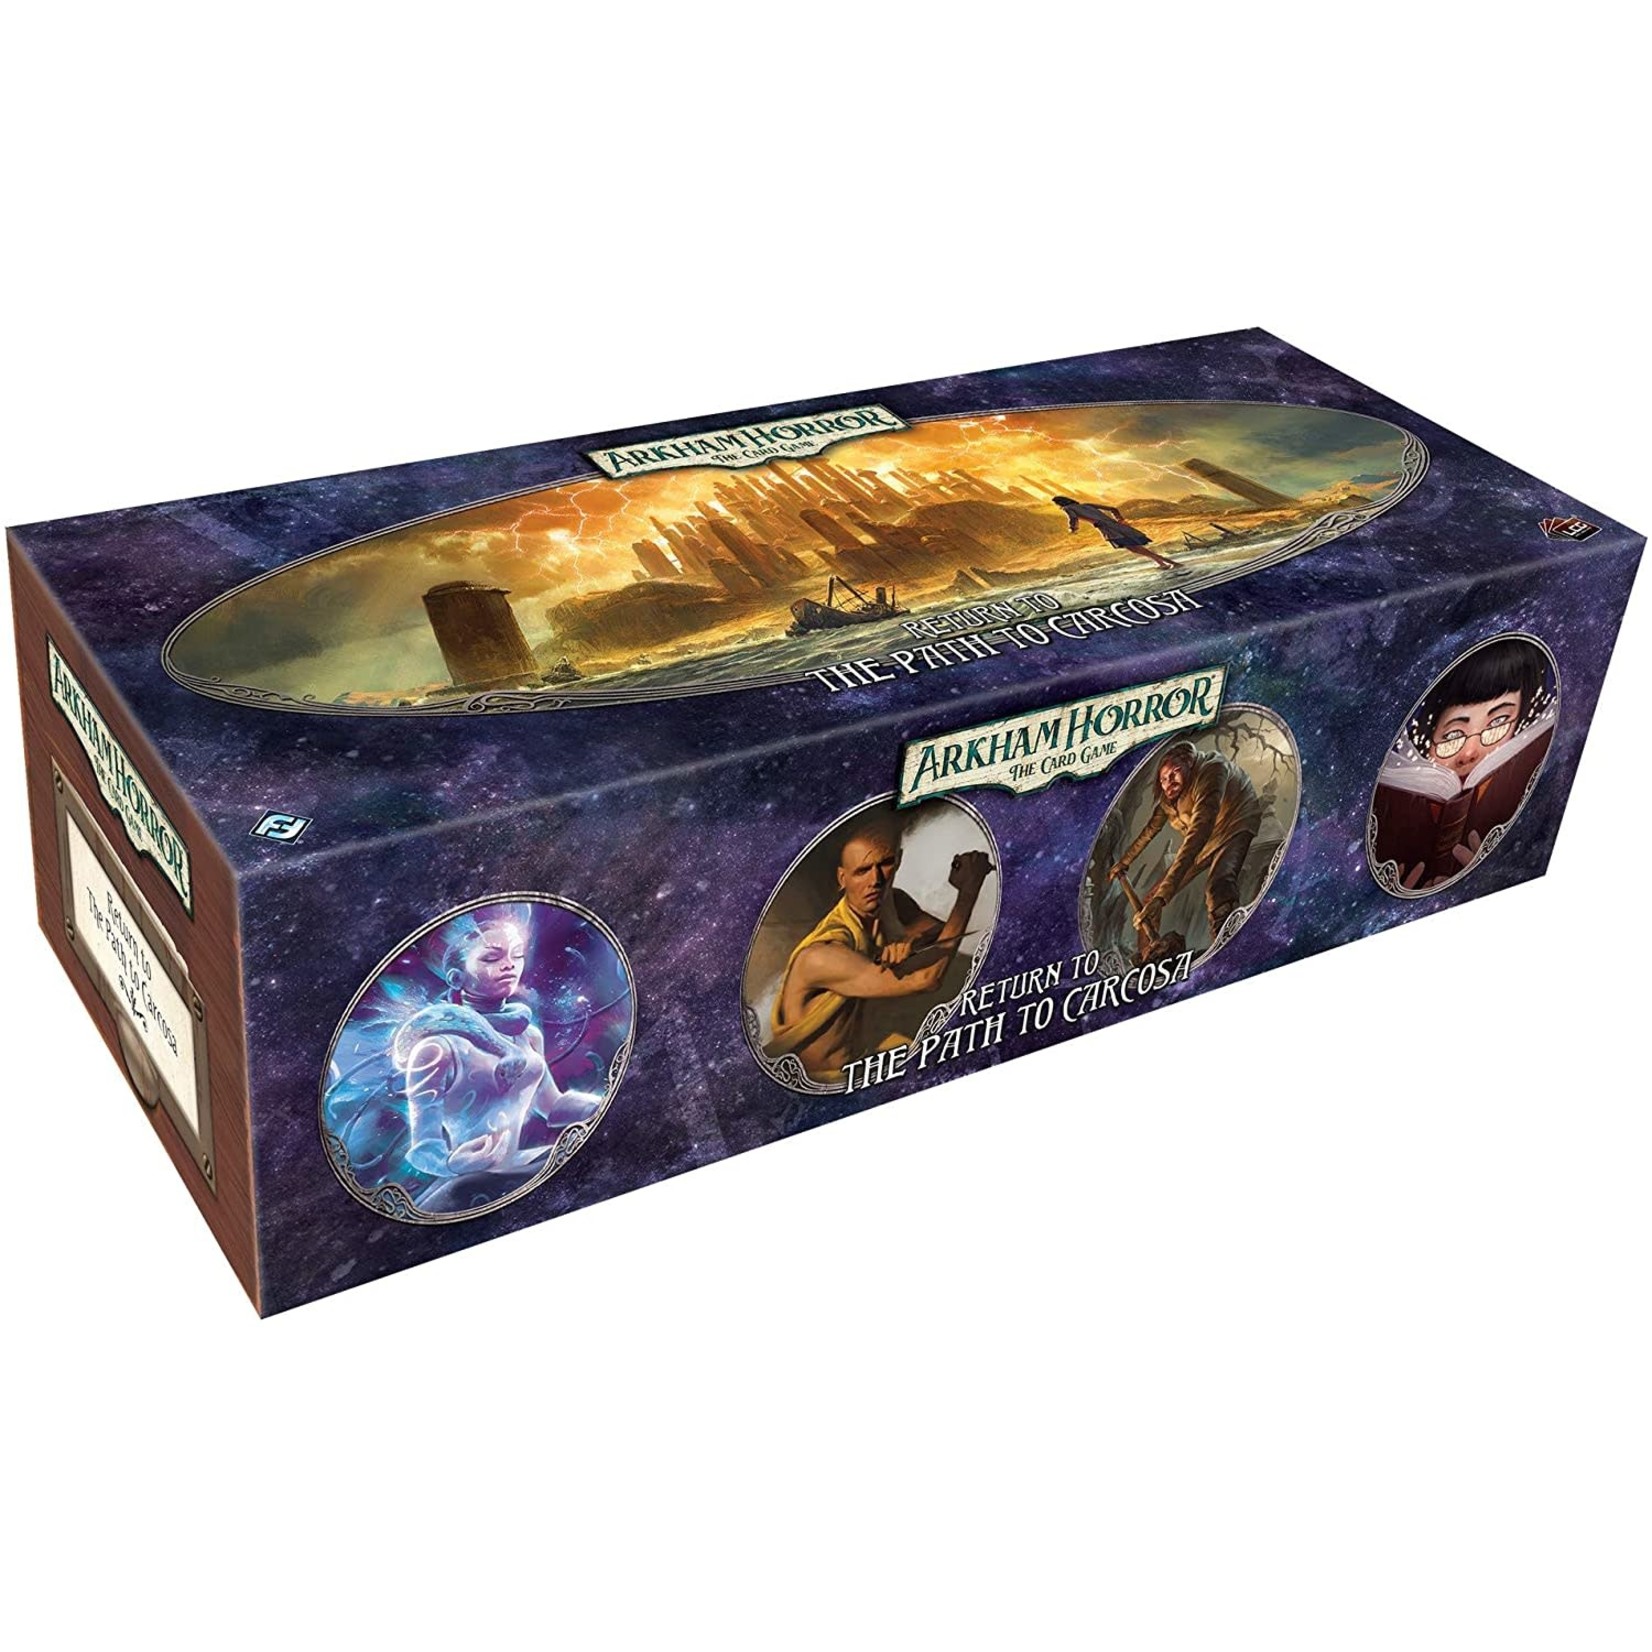 Fantasy Flight Games Arkham Horror LCG: Return to The Path to Carcosa Deluxe Expansion